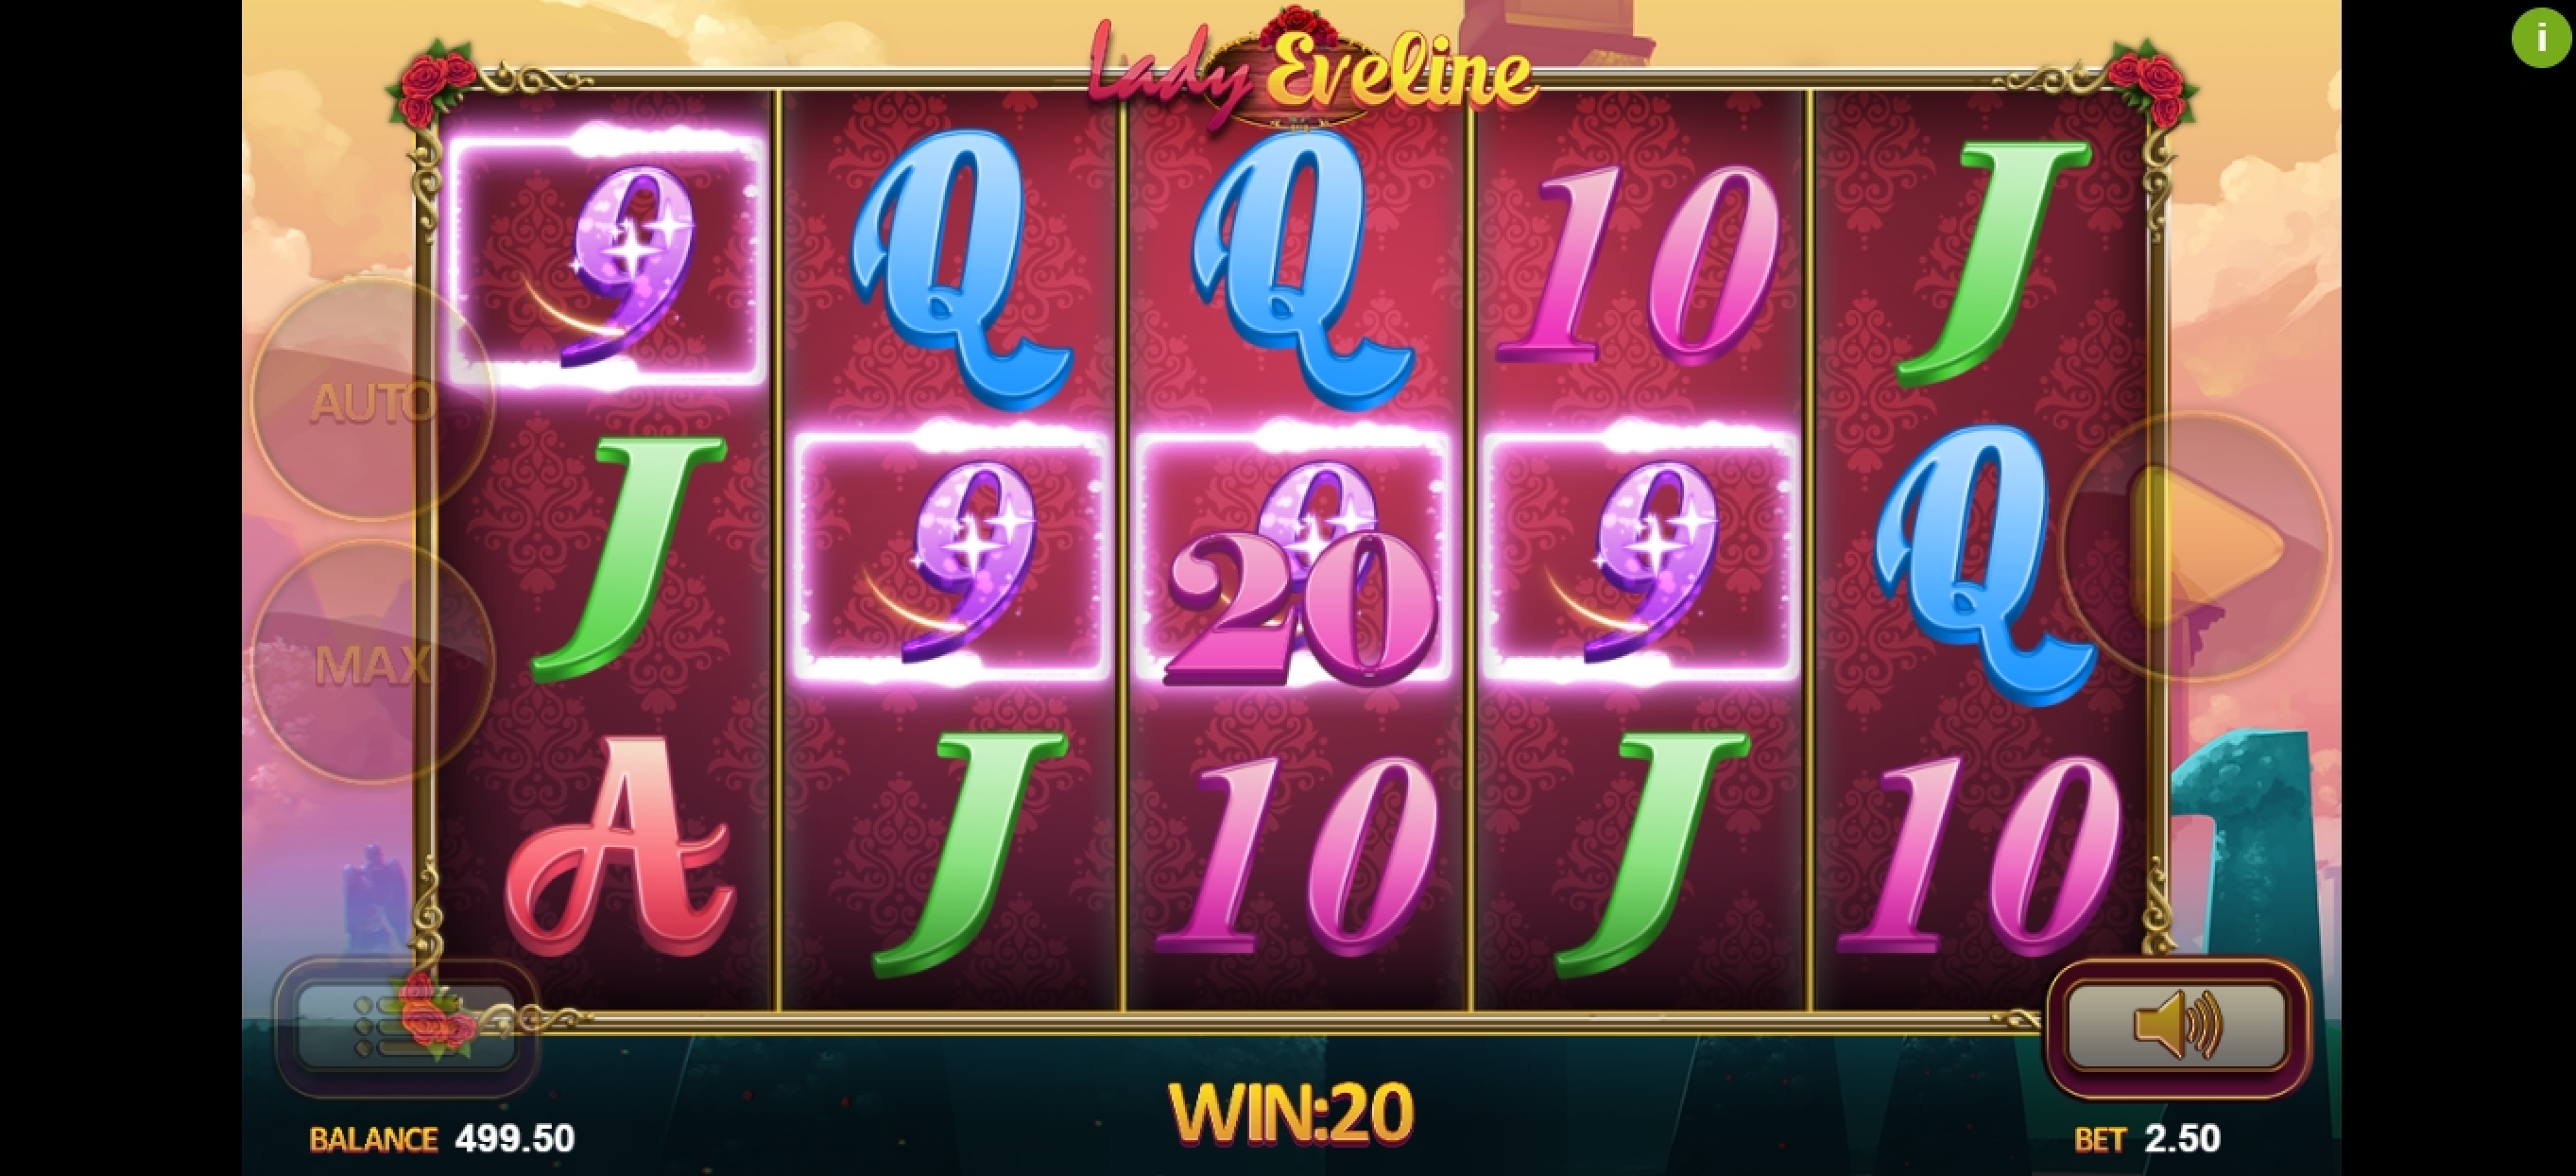 Win Money in Lady Eveline Free Slot Game by Magma